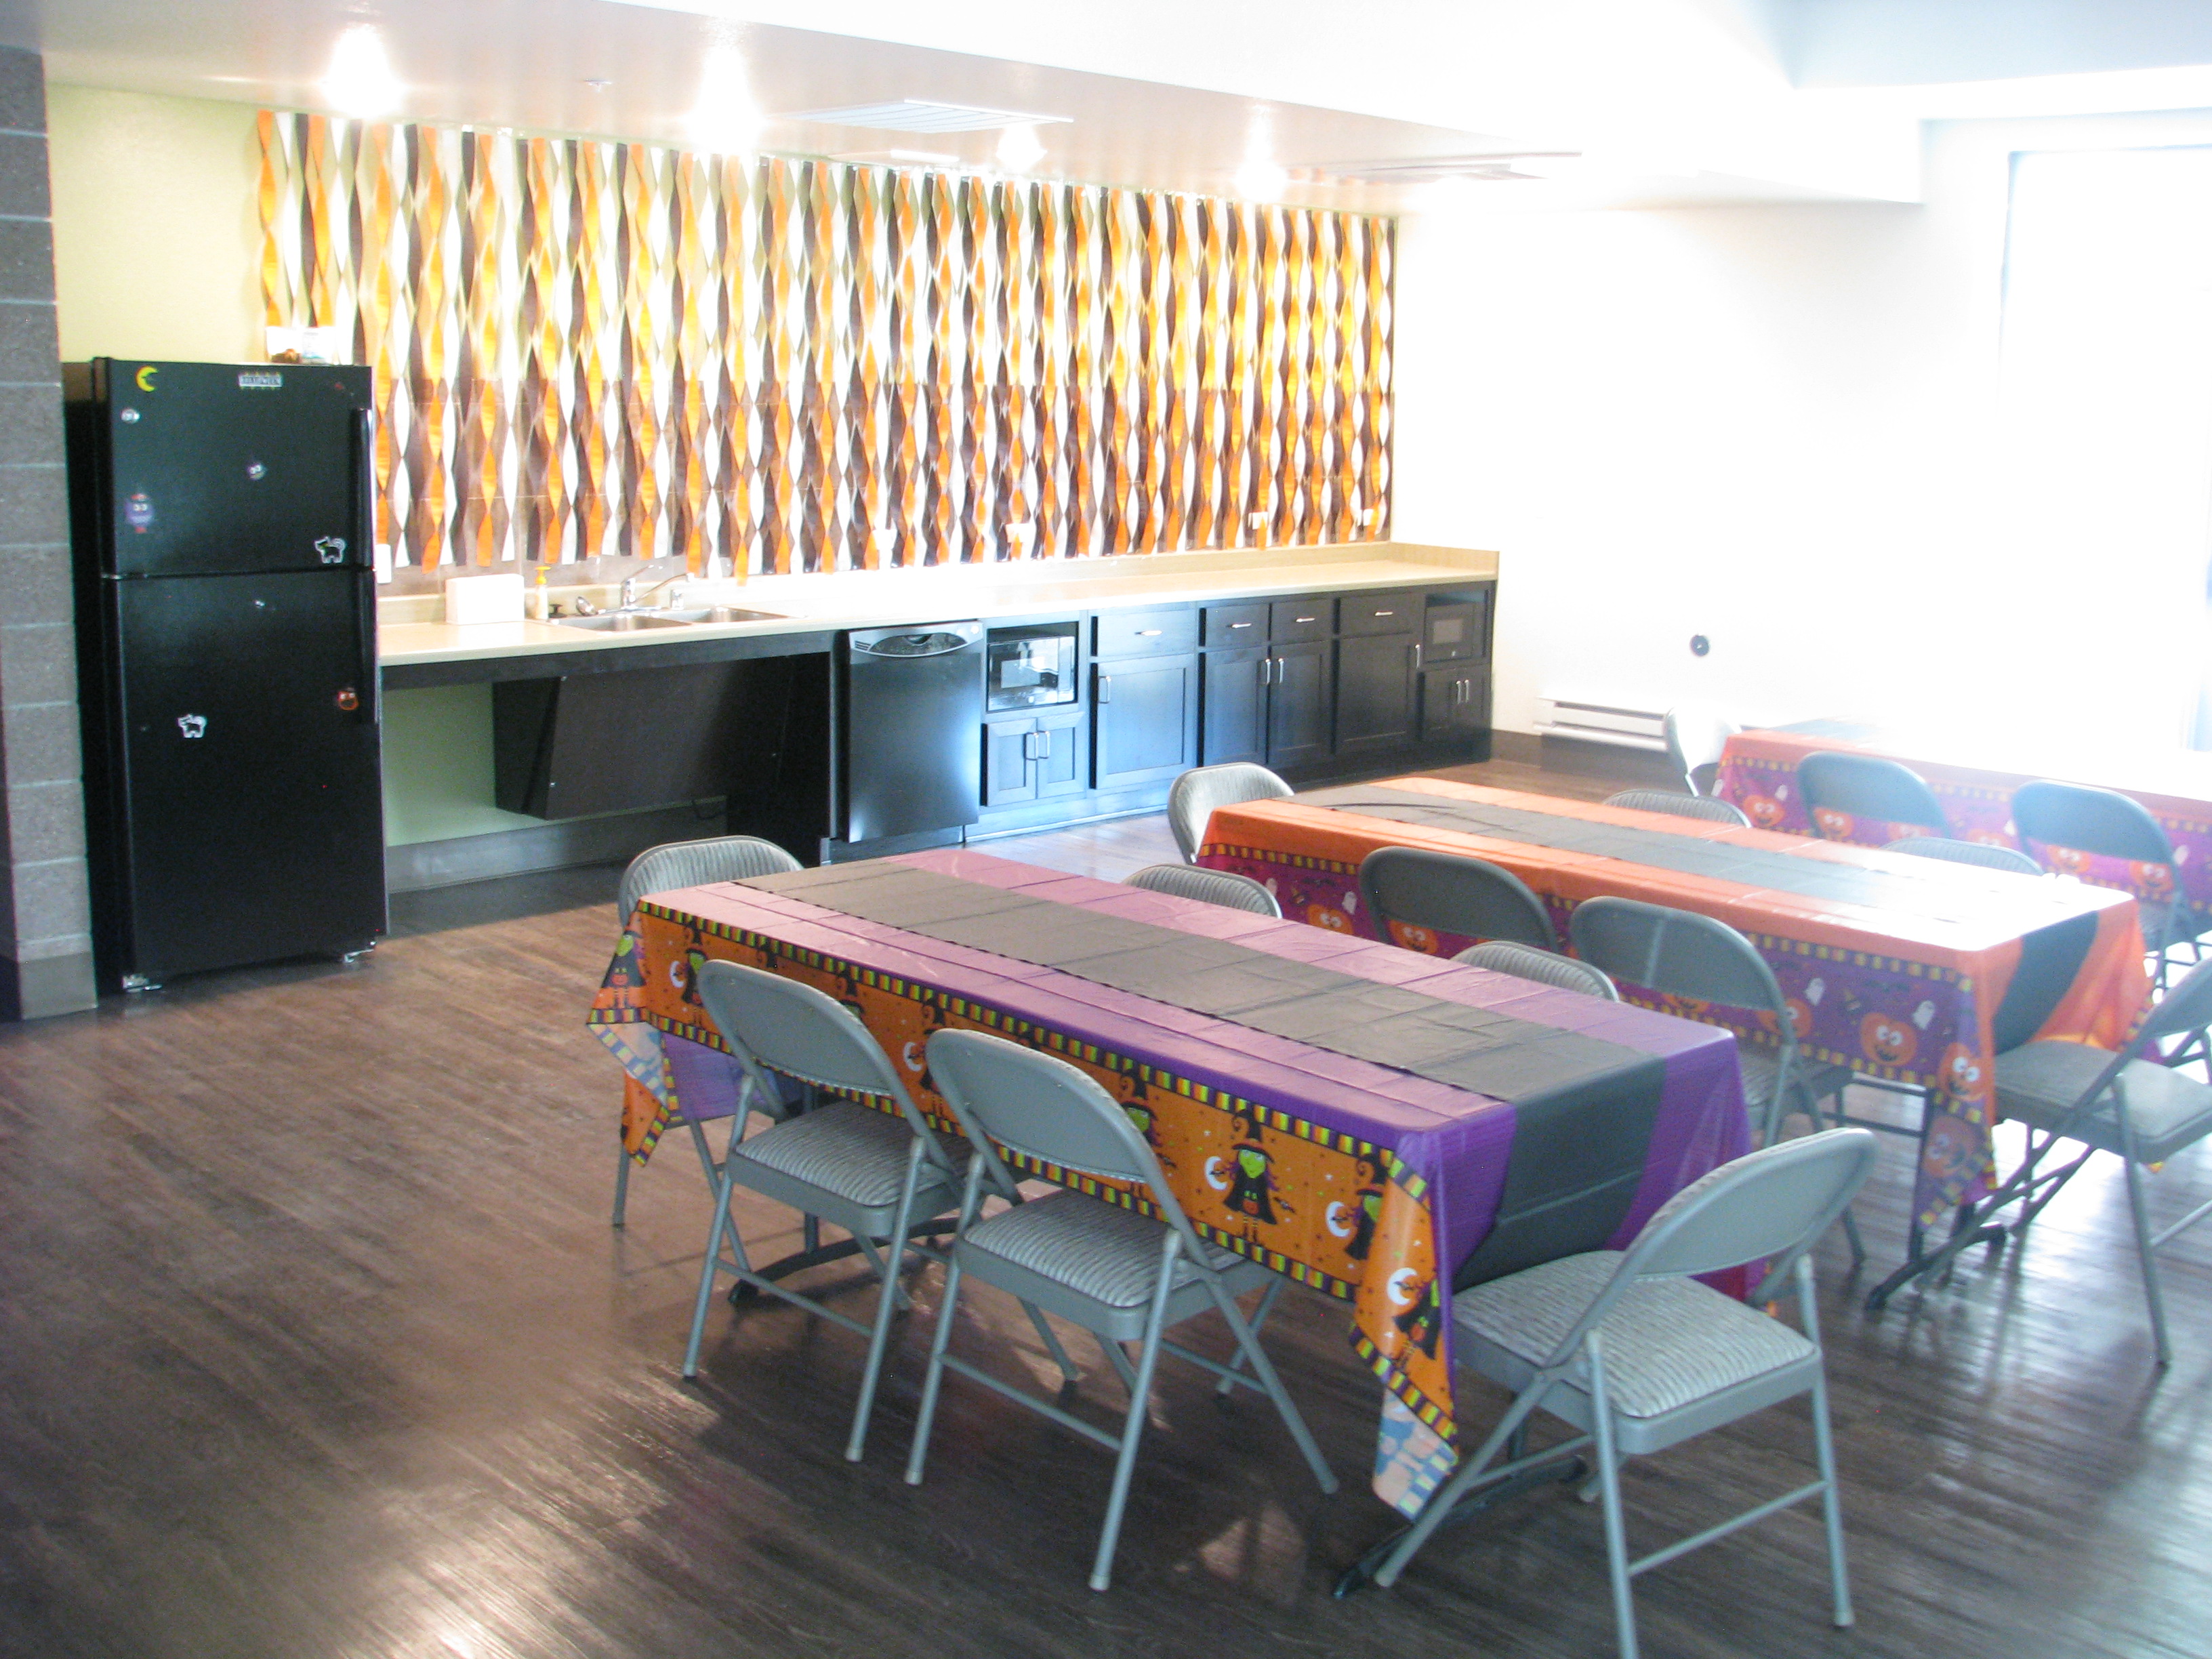 Photograph of a room with a kitchenette and several tables and chairs with Halloween-themed paper tablecloths. 